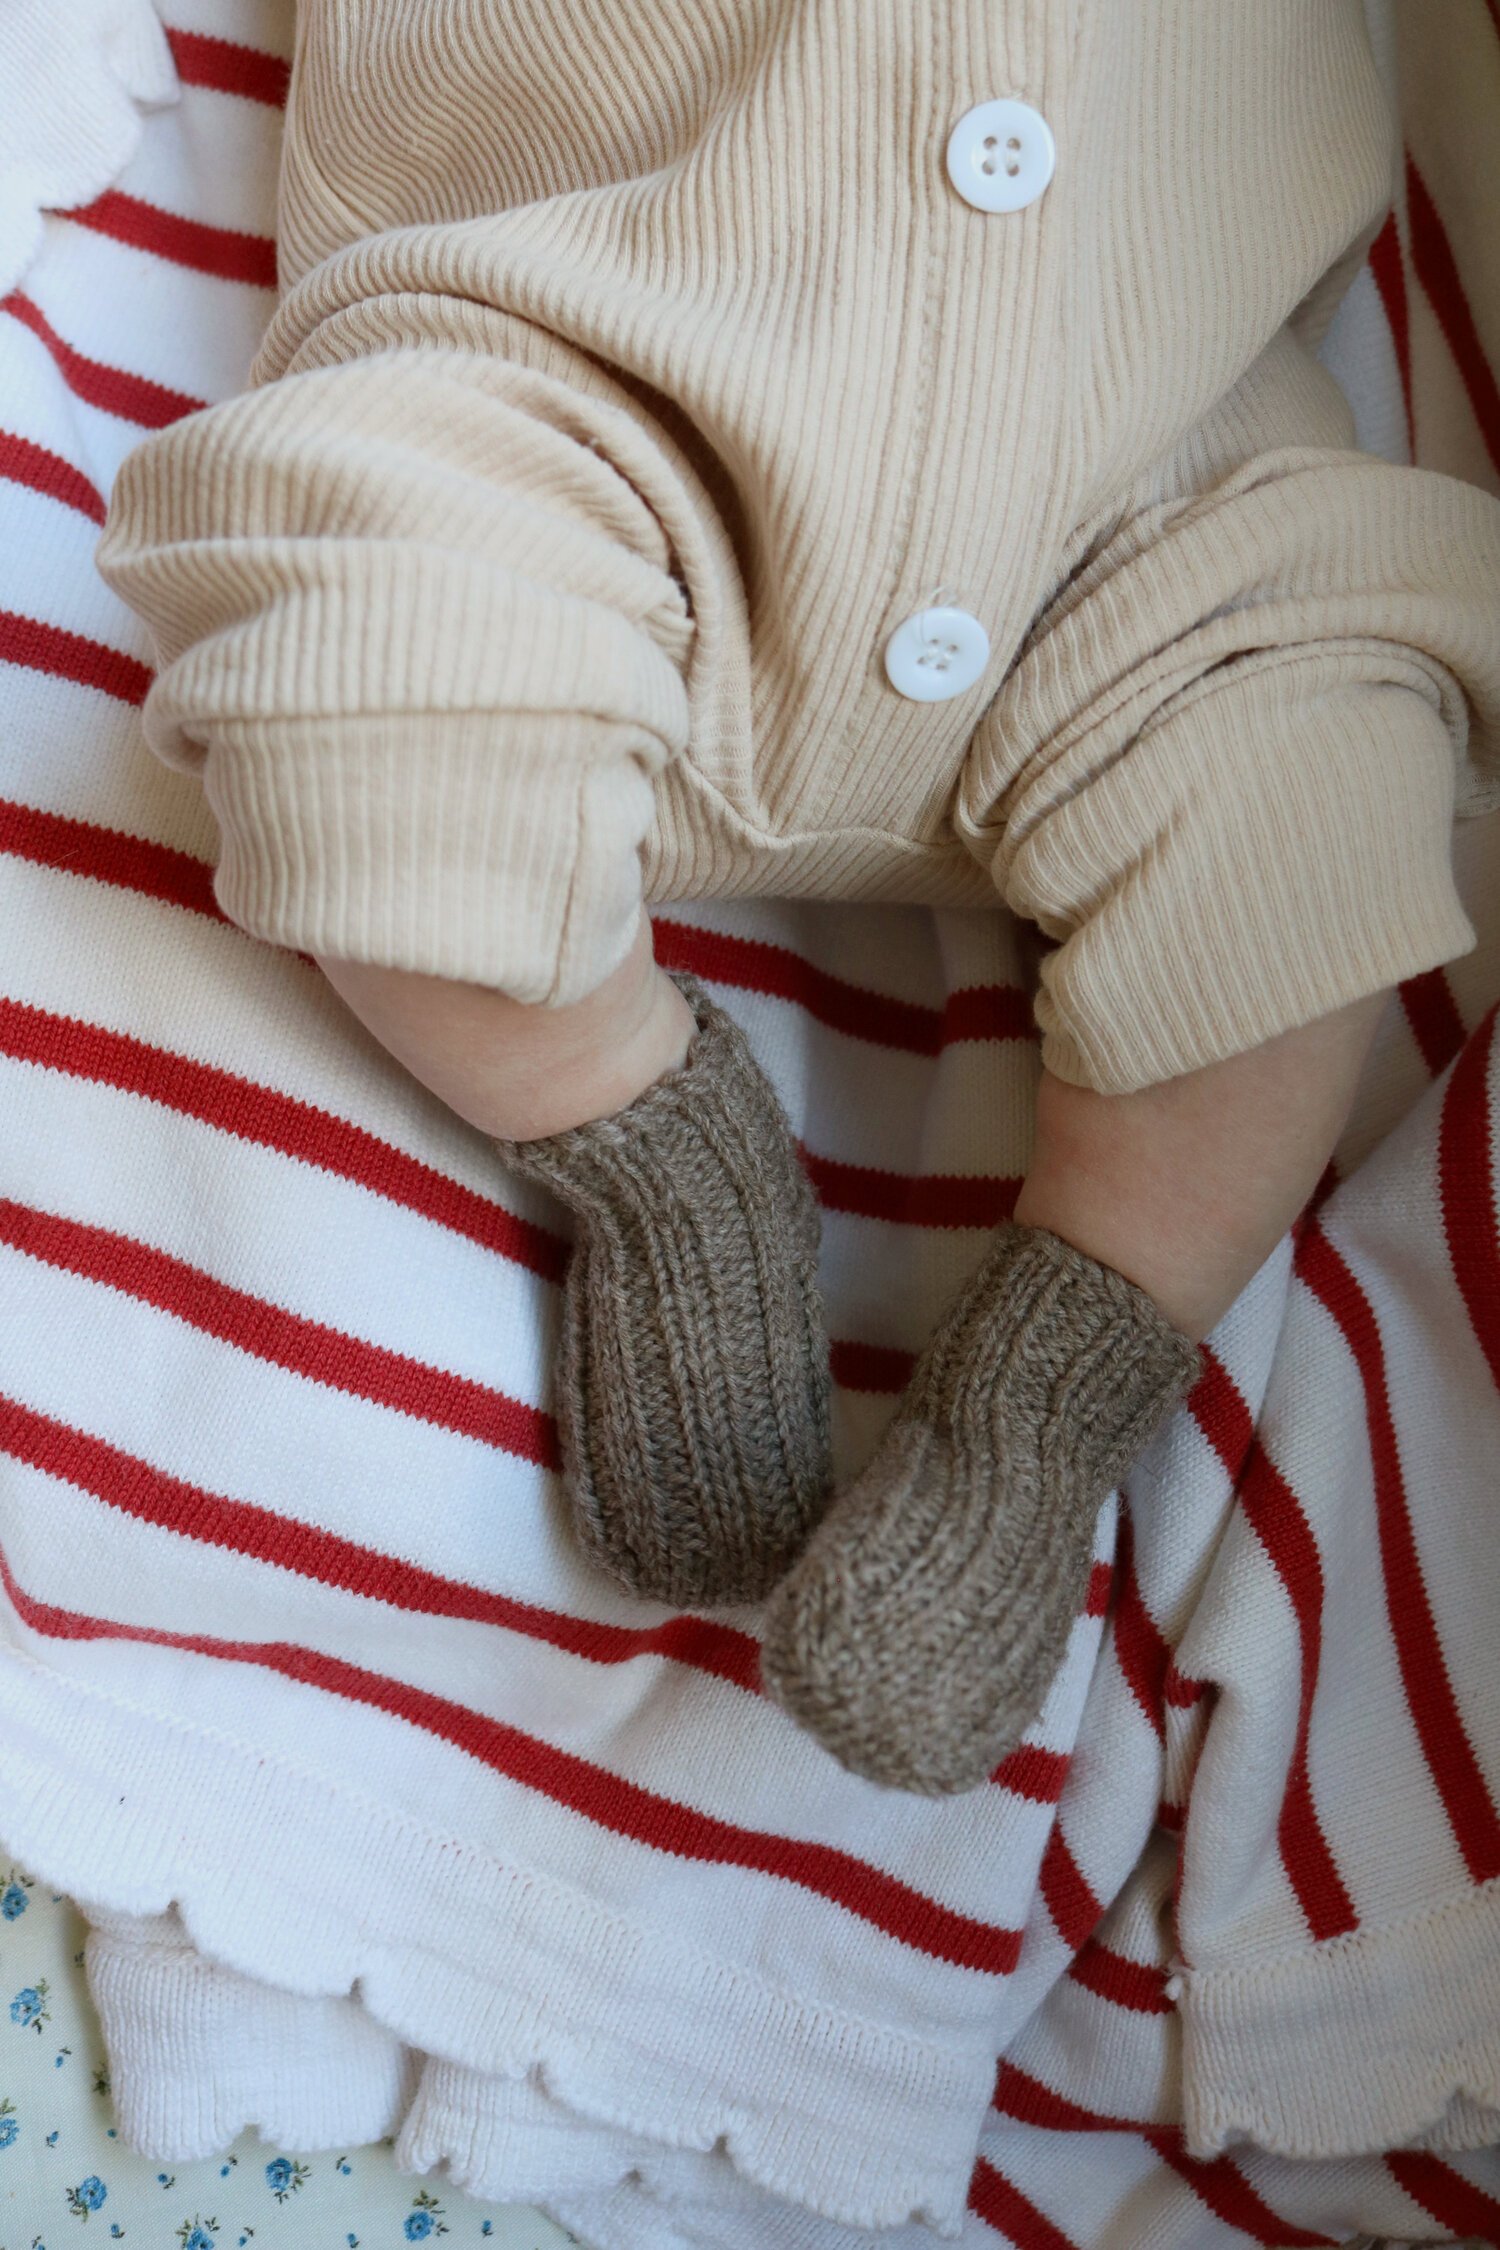 Knitting For Baby, The Free “Perfect Newborn Socks” Pattern – New England's  Narrow Road